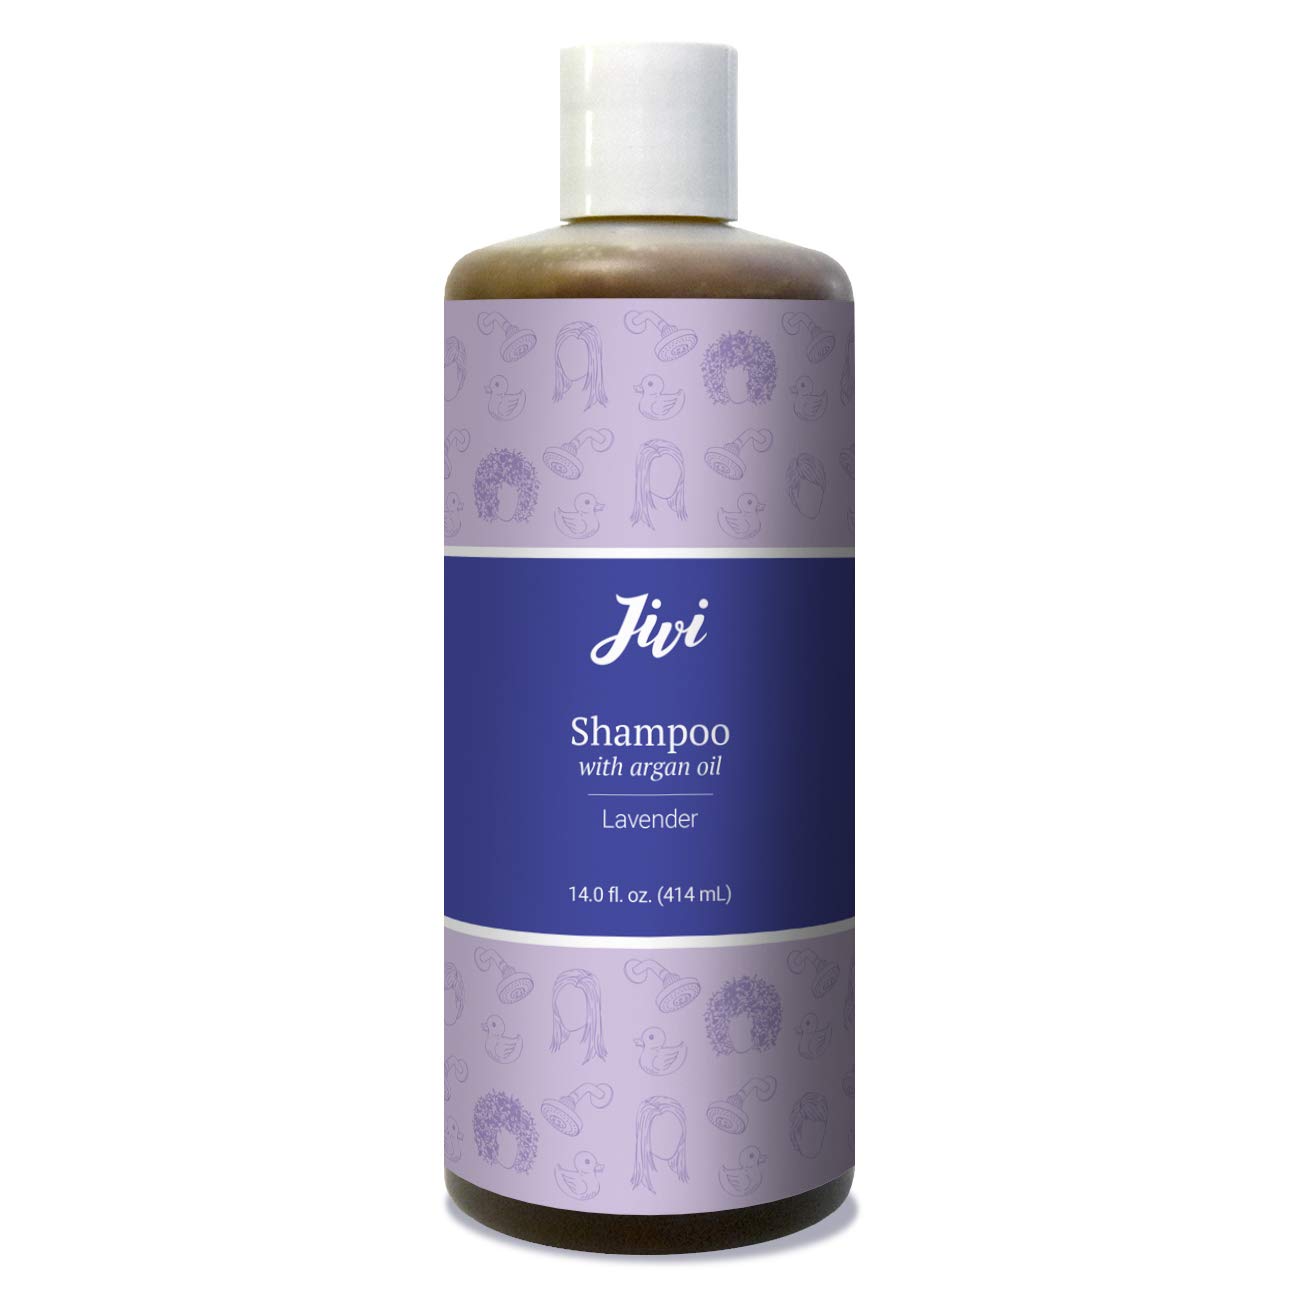 Jivi Shampoo With Argan Oil (Lavender) | Daily Use Shampoo for Healthier Hair | 100% Natural with Organic Ingredients | Made for All Hair Types, Color Safe | 14 fl. oz